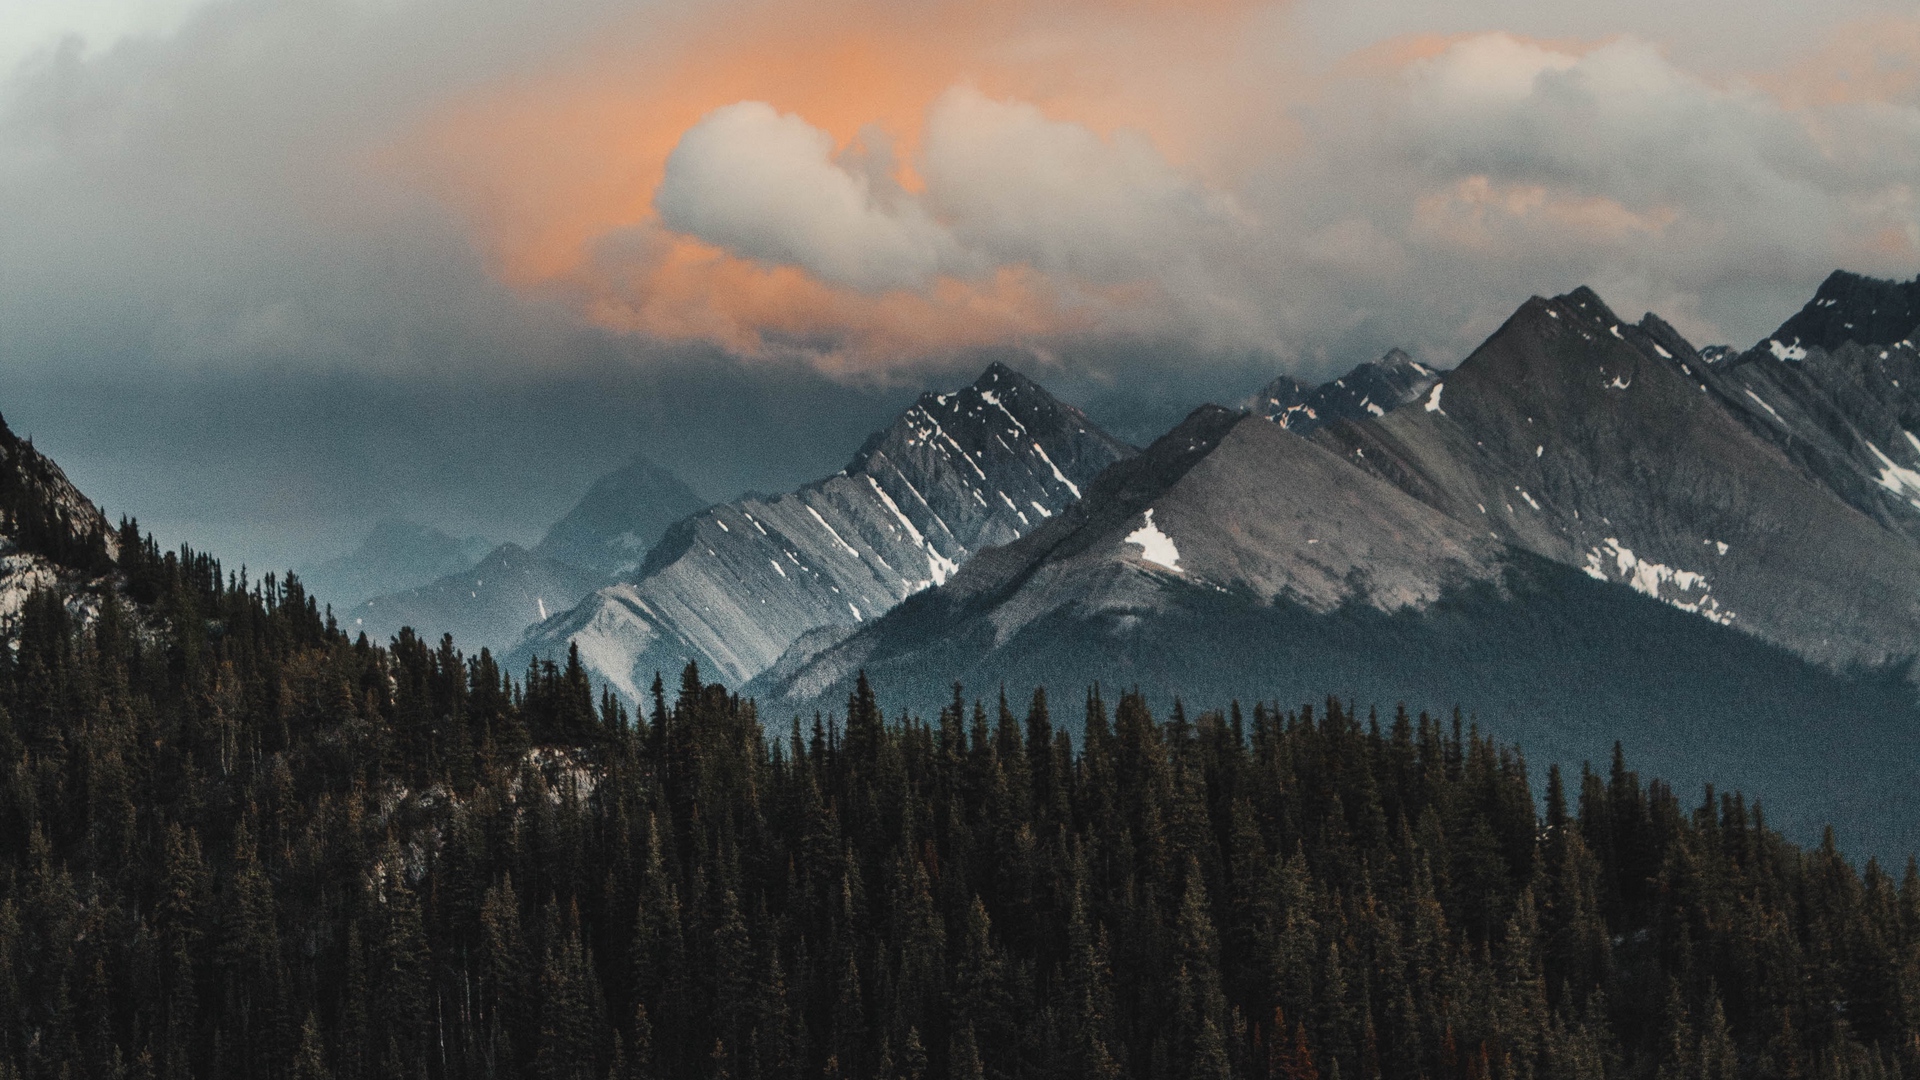 Wallpaper Mountains, Forest, Clouds, Mountain Range, - Mountain Range - HD Wallpaper 